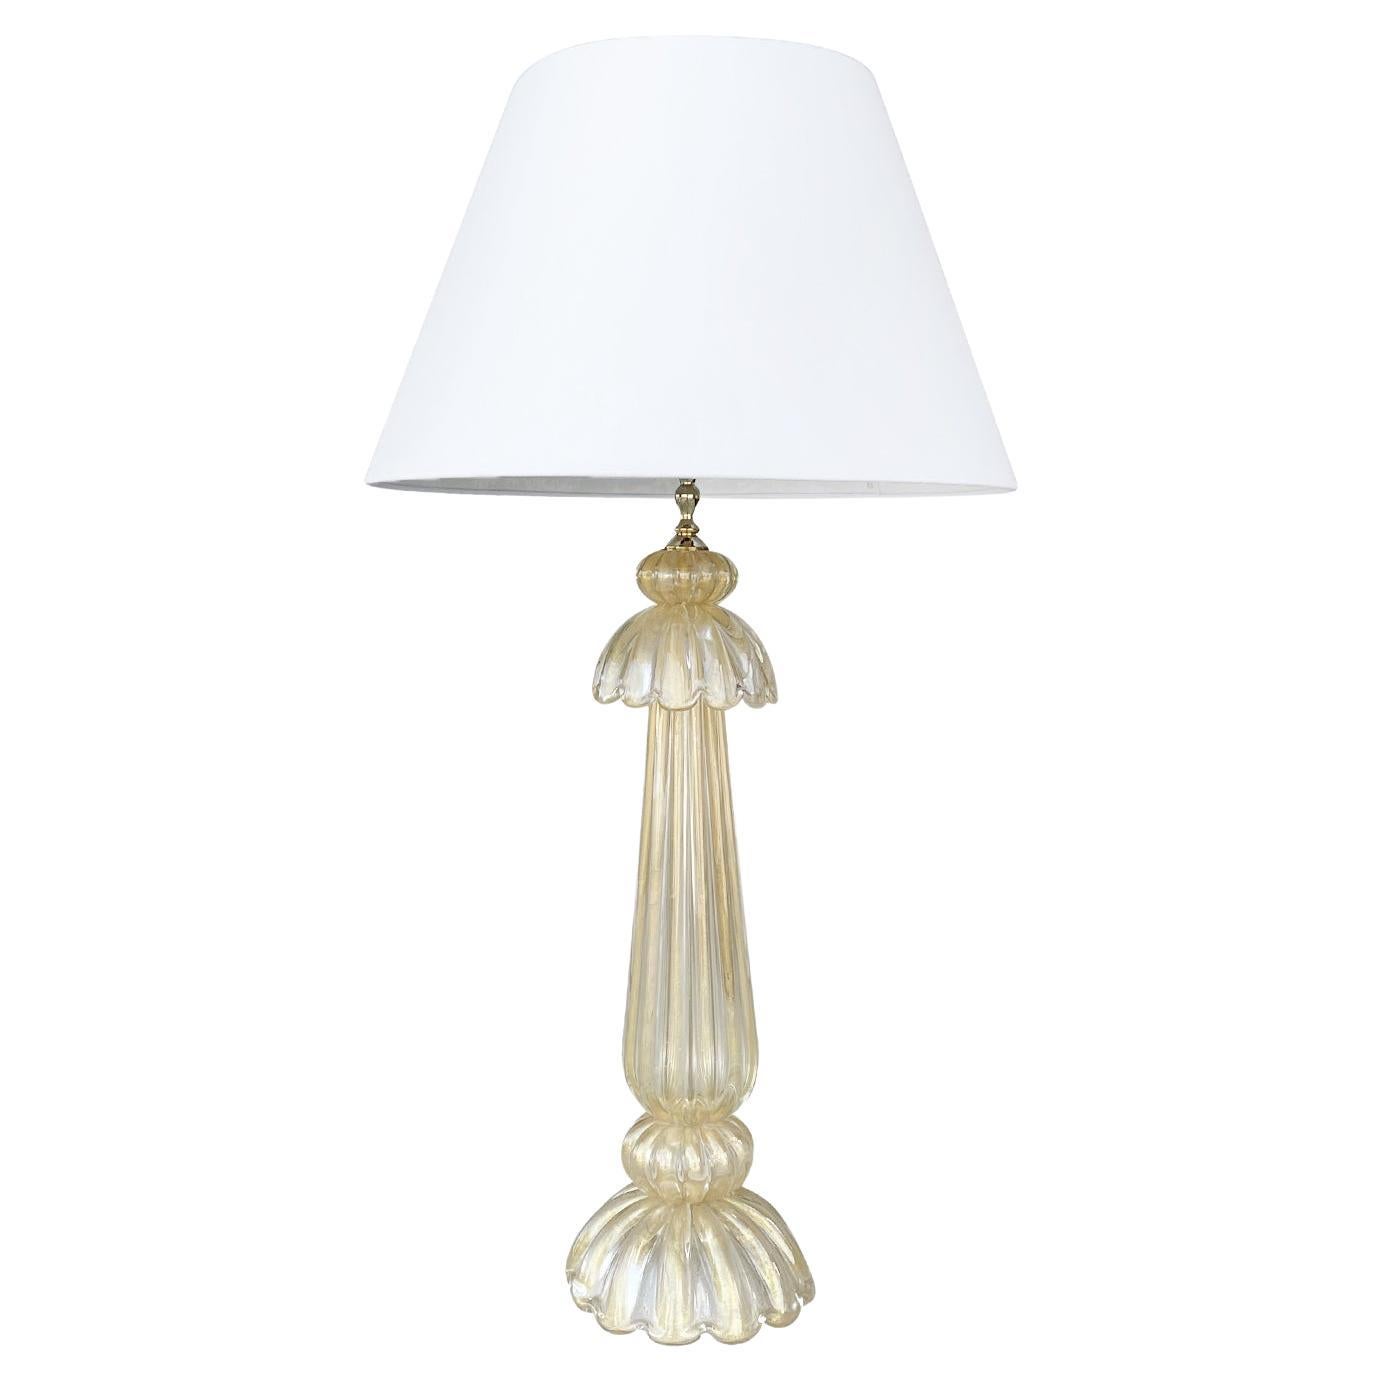 20th Century Italian Tall Vintage Murano Glass Table Lamp by Barovier & Toso en vente